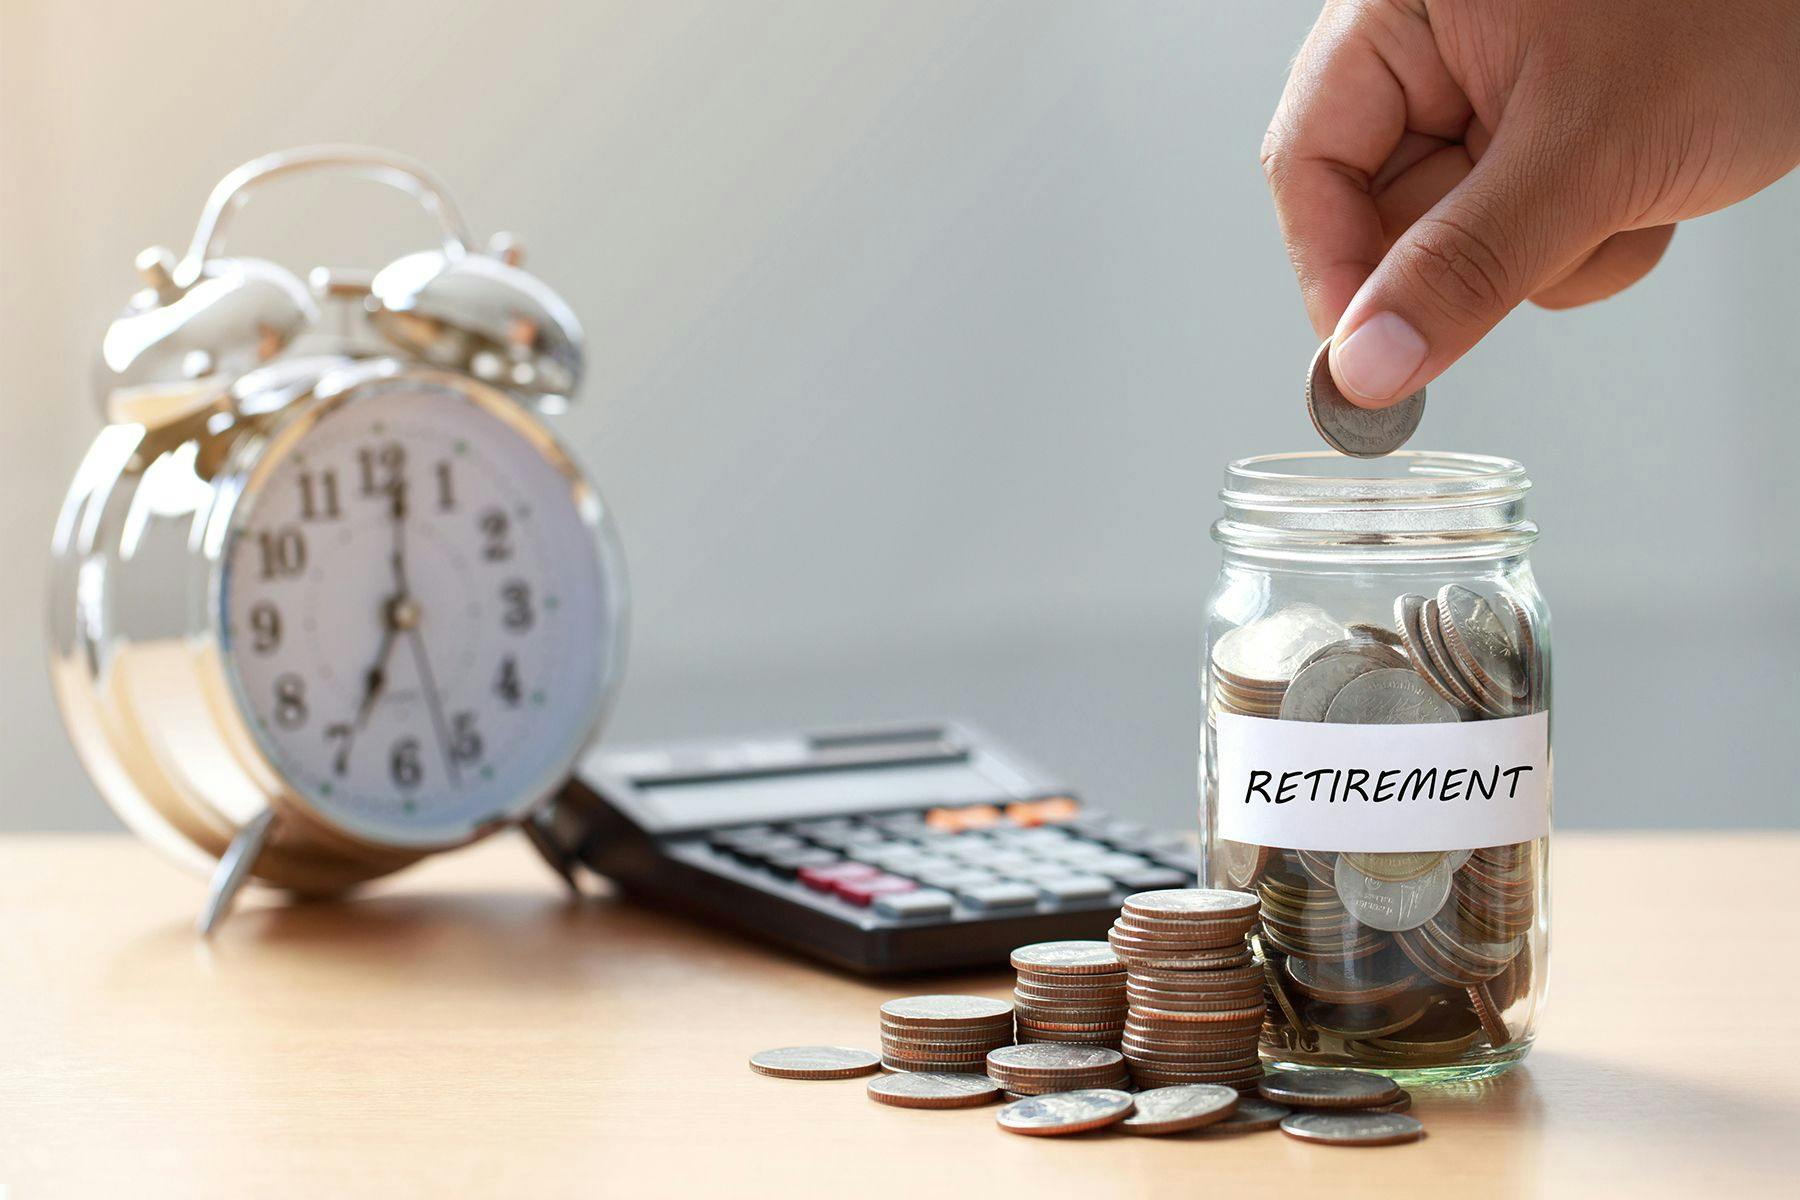 Dentists Should Be Aware of What Defined Benefit Retirement Plans Can Do for Them | Image Credit: © Pcess609 - stock.adobe.com